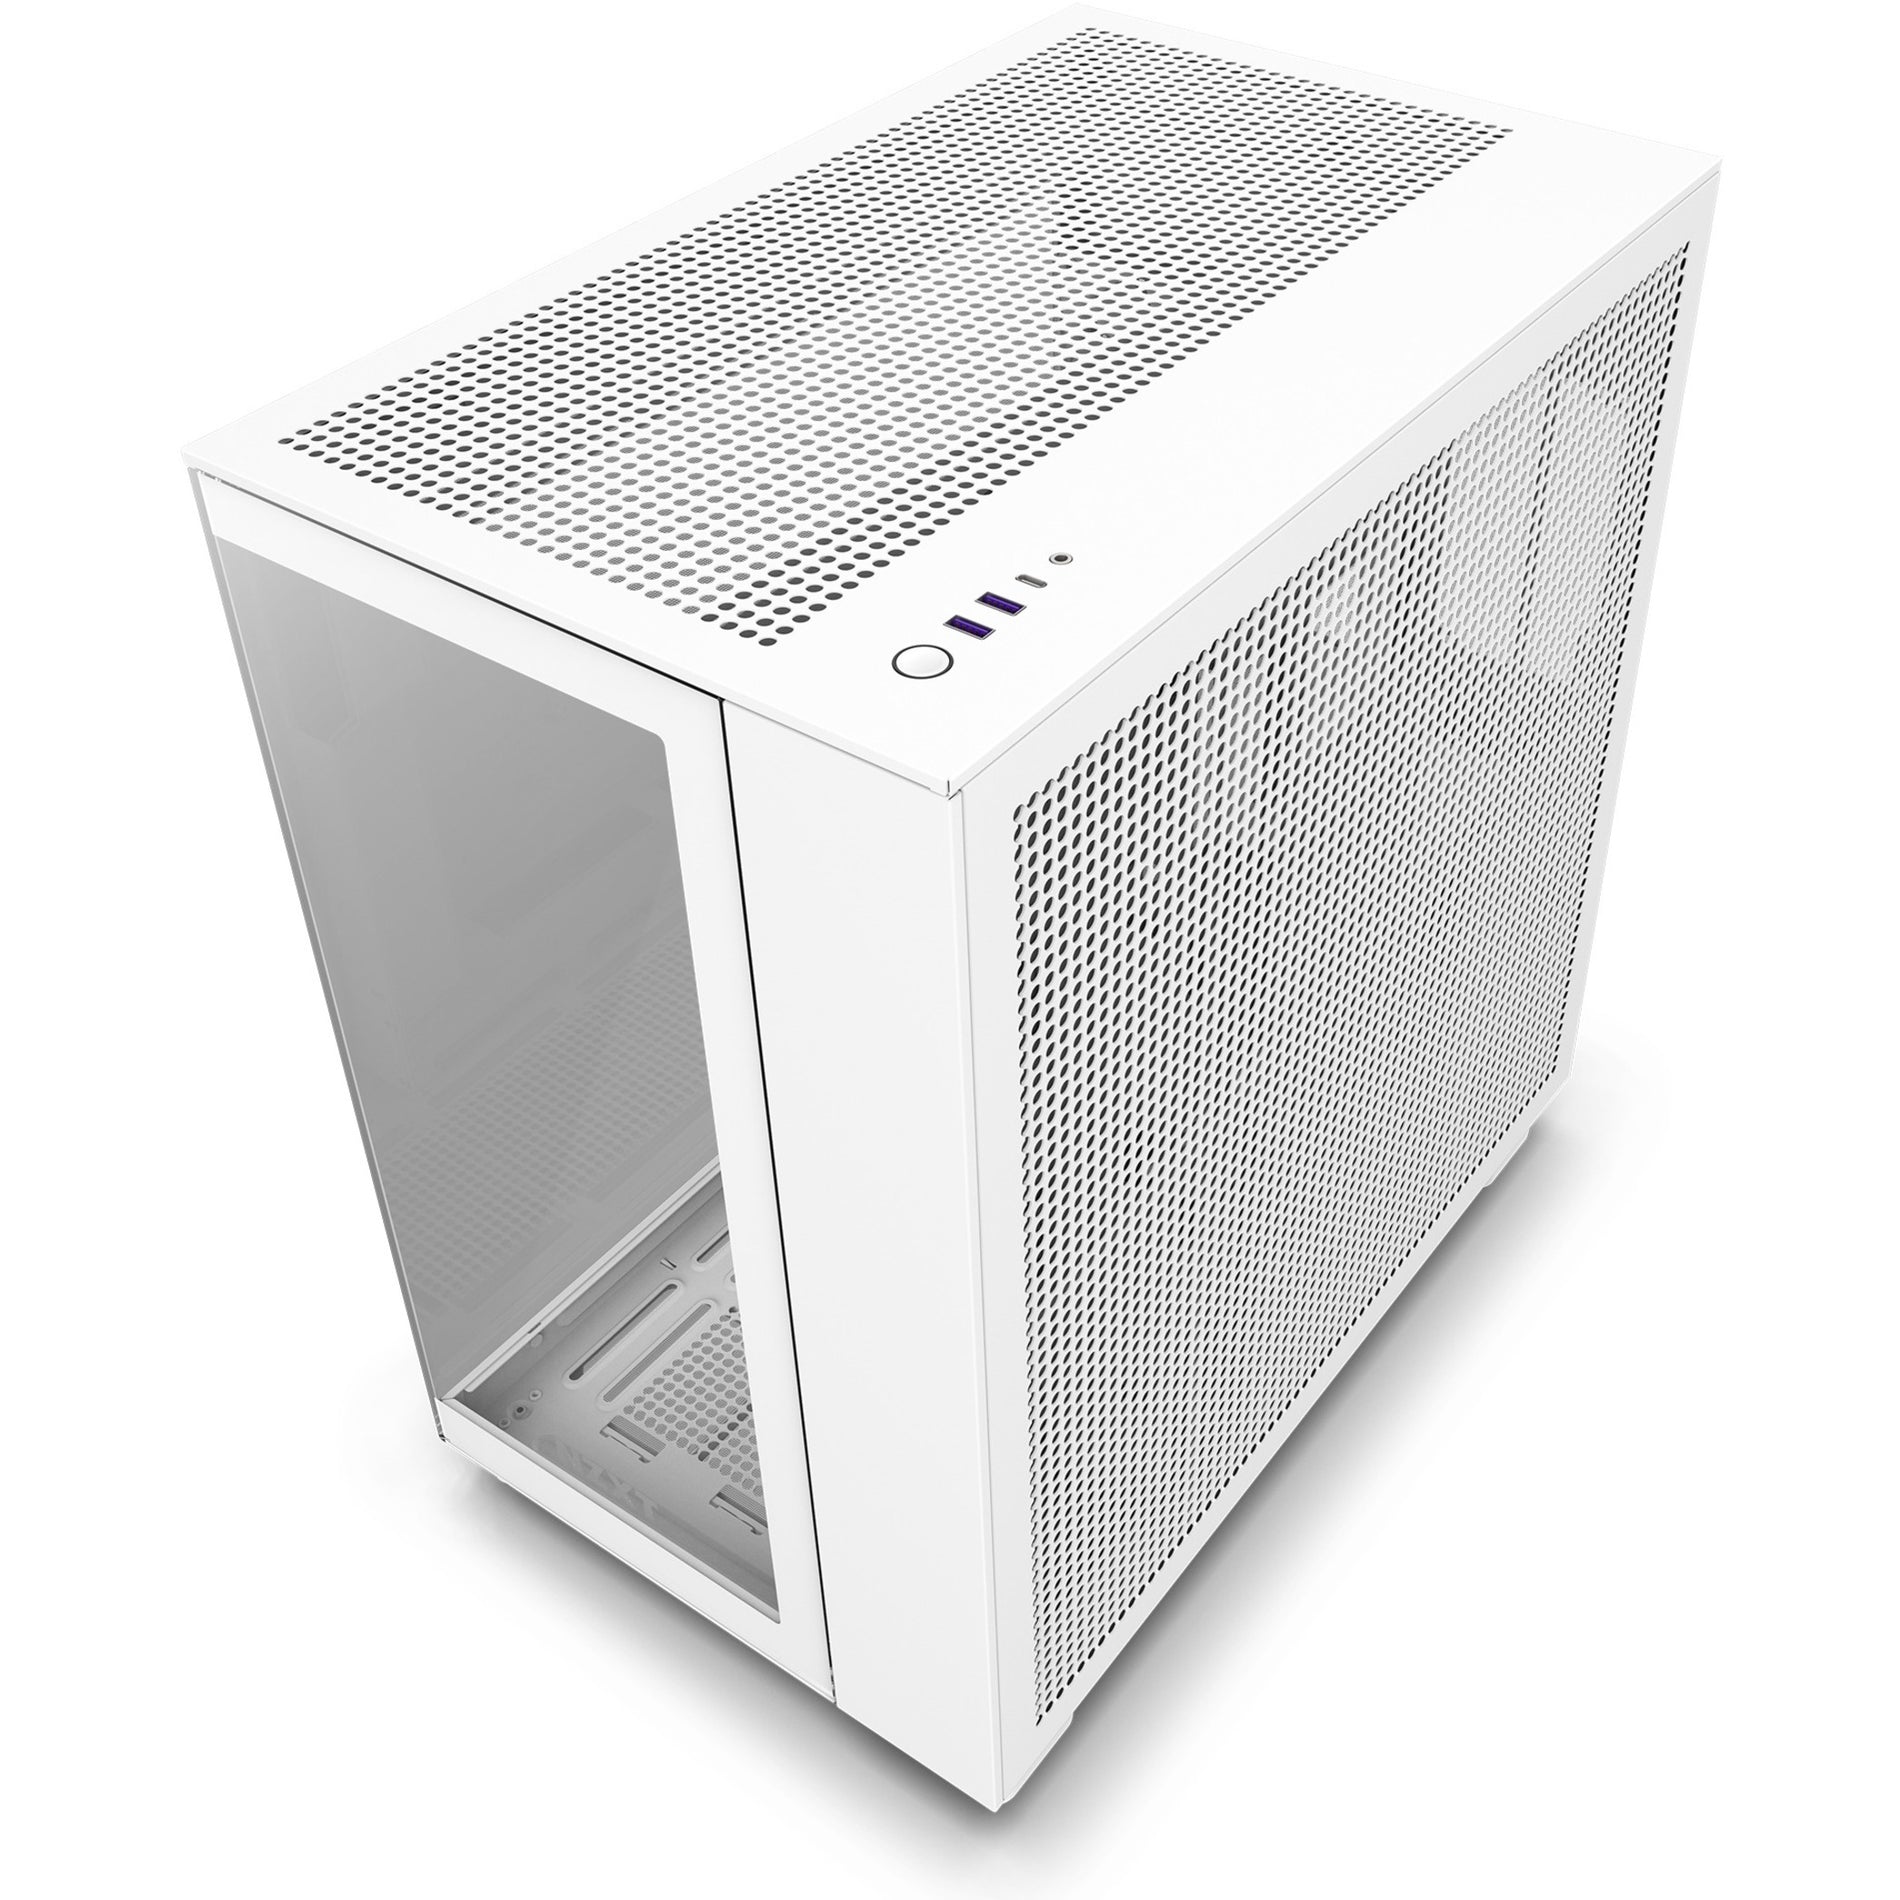 NZXT H9 Flow Tempered Glass ATX Mid-Tower Computer Case - Black